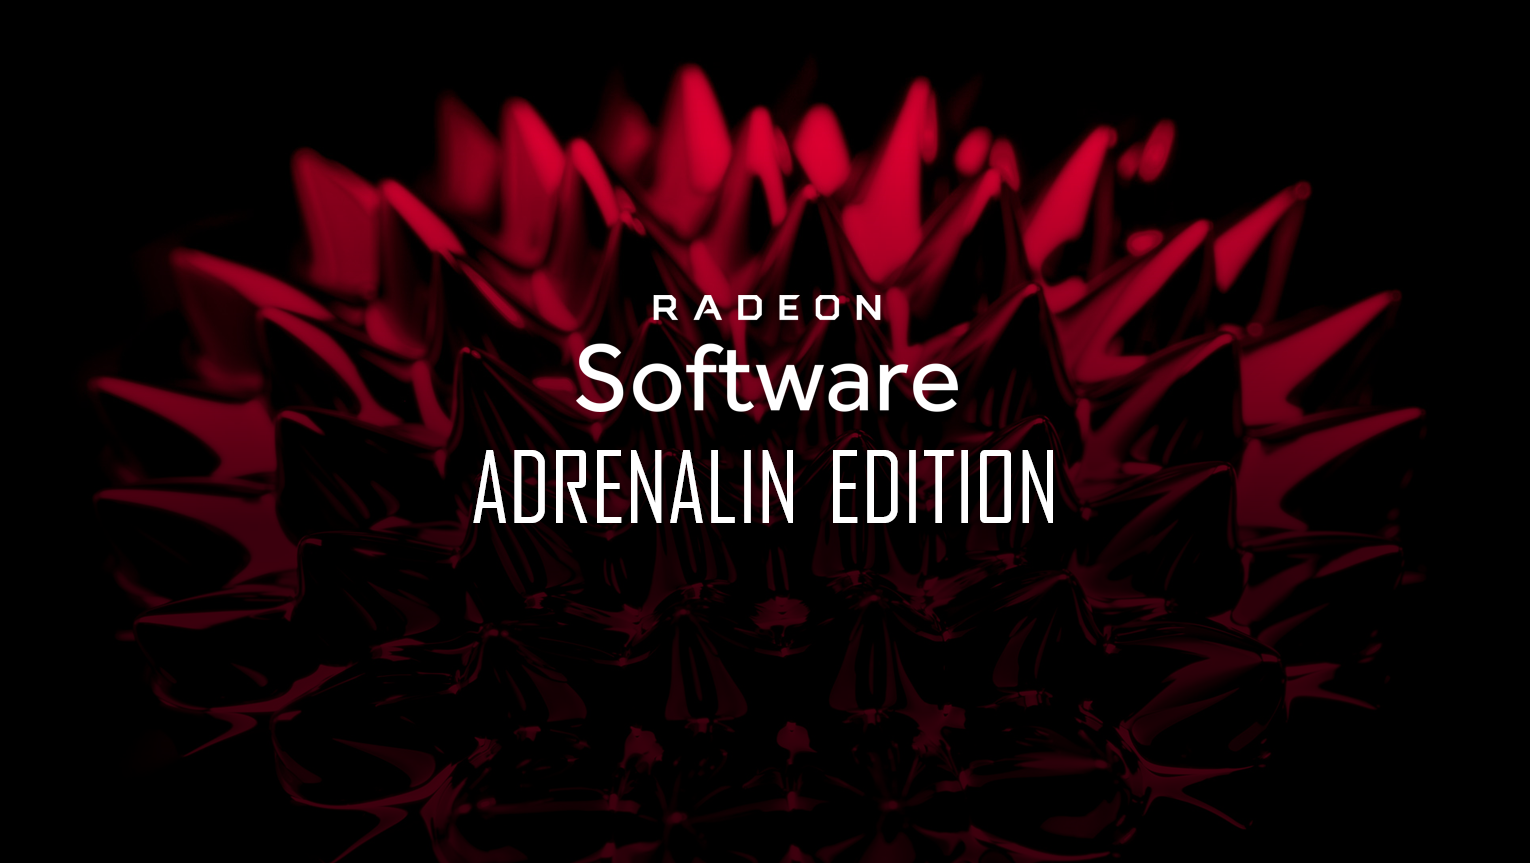 Media asset in full size related to 3dfxzone.it news item entitled as follows: AMD Radeon Software Adrenalin 2019 Edition 19.8.2 - Control & Man of Medan Ready | Image Name: news29926_Radeon-Software-Adrenalin-2019-Edition_1.png